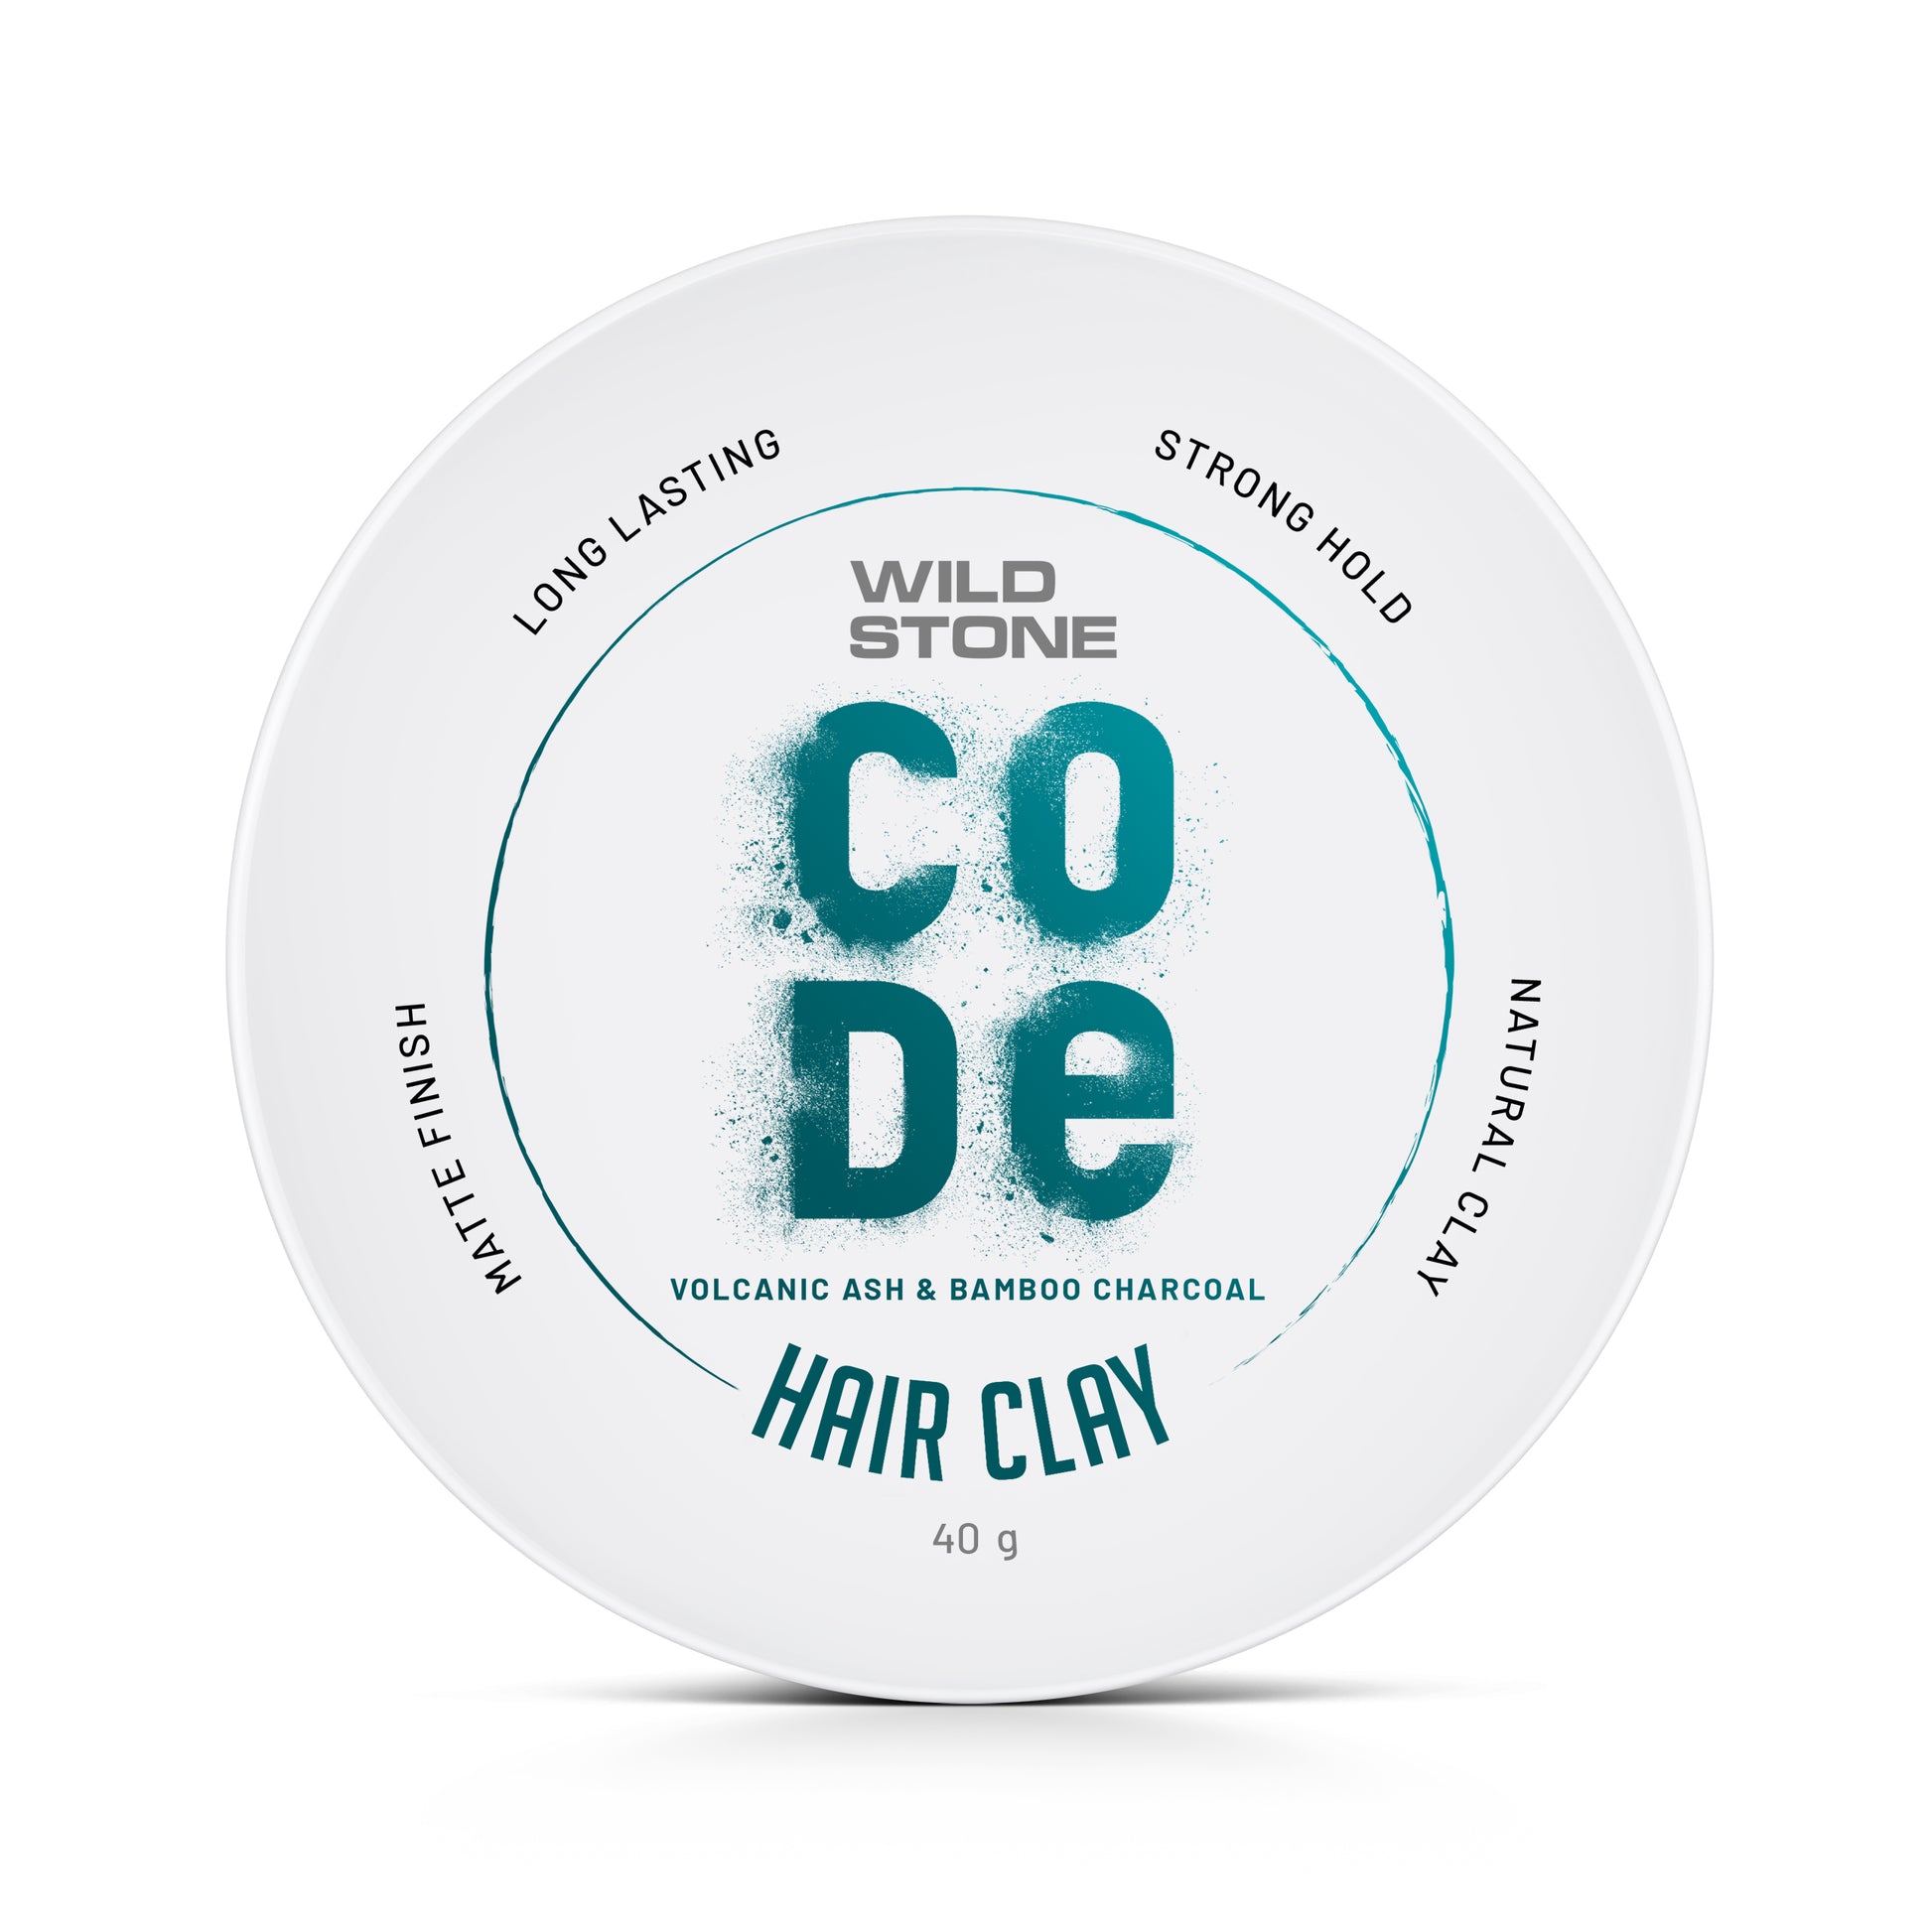 CODE Hair Clay for men